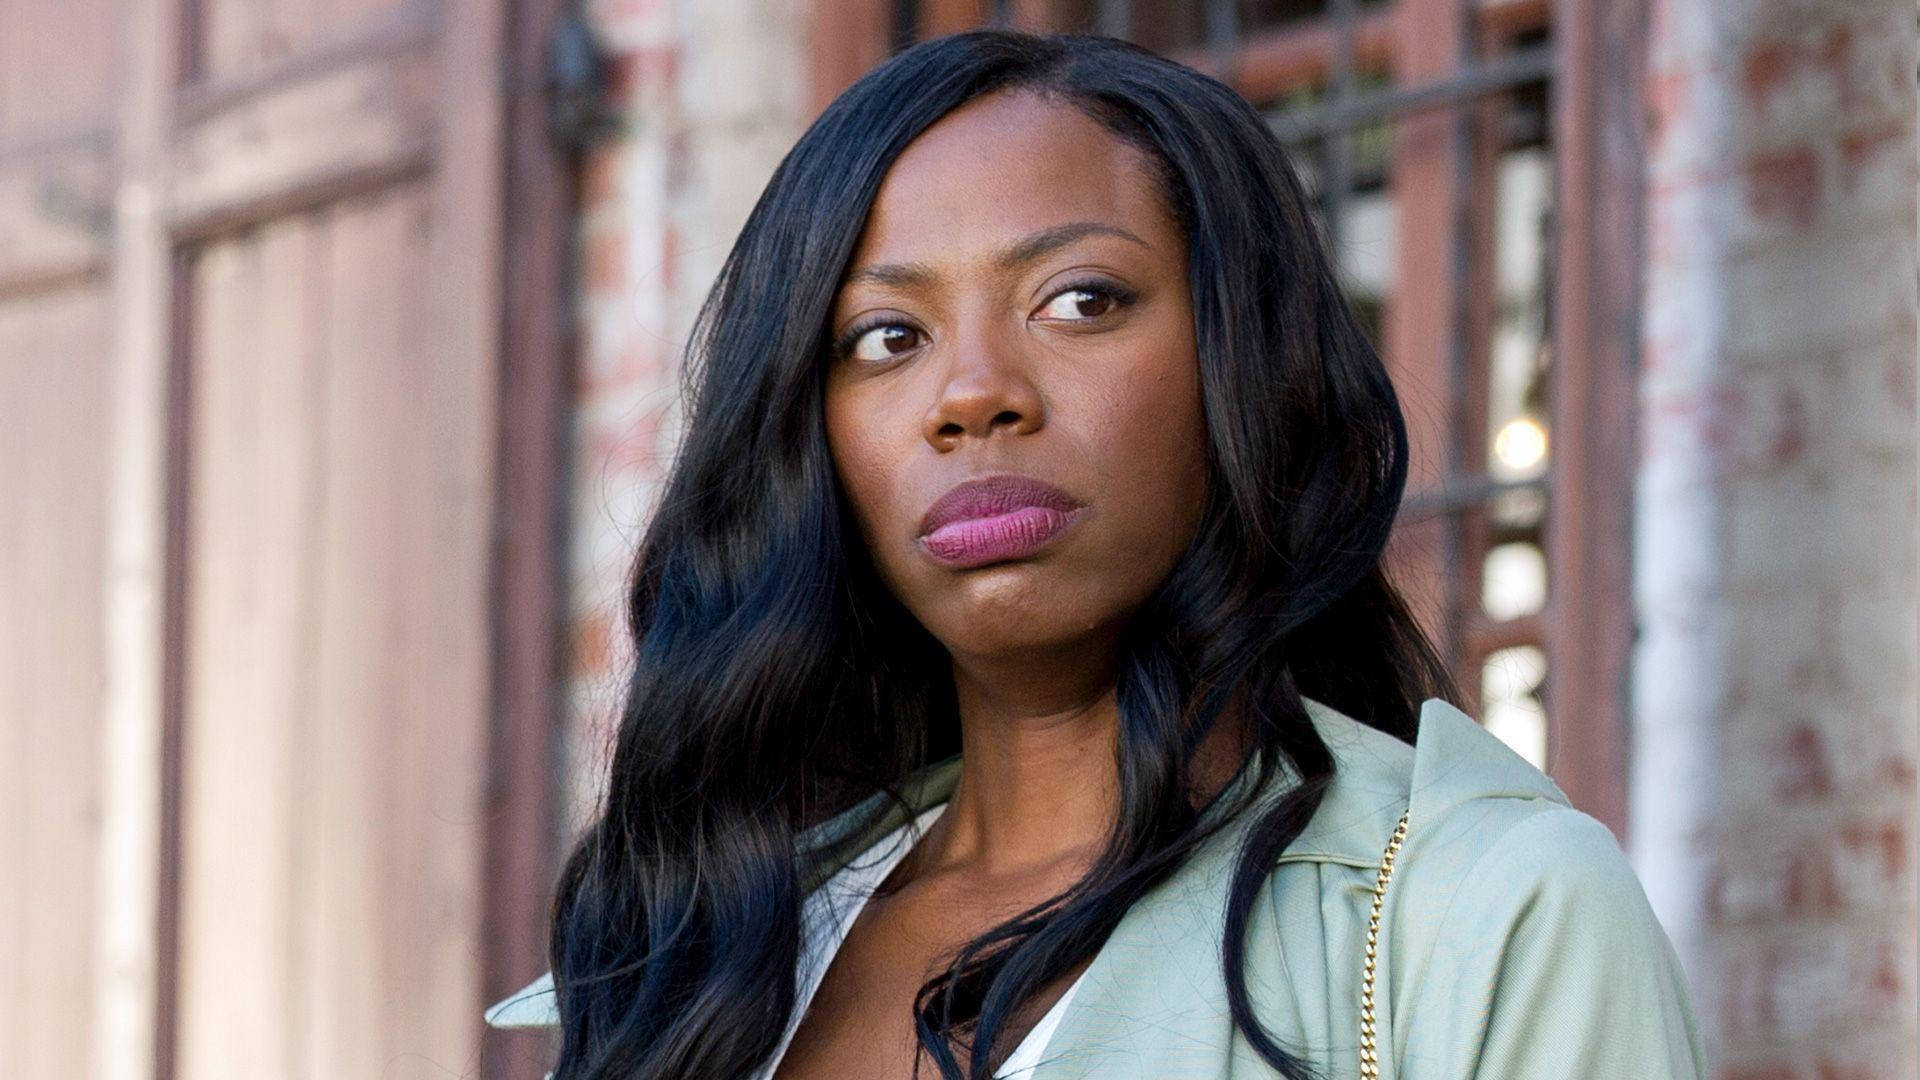 Insecure Series Actress Yvonne Orji Wallpaper